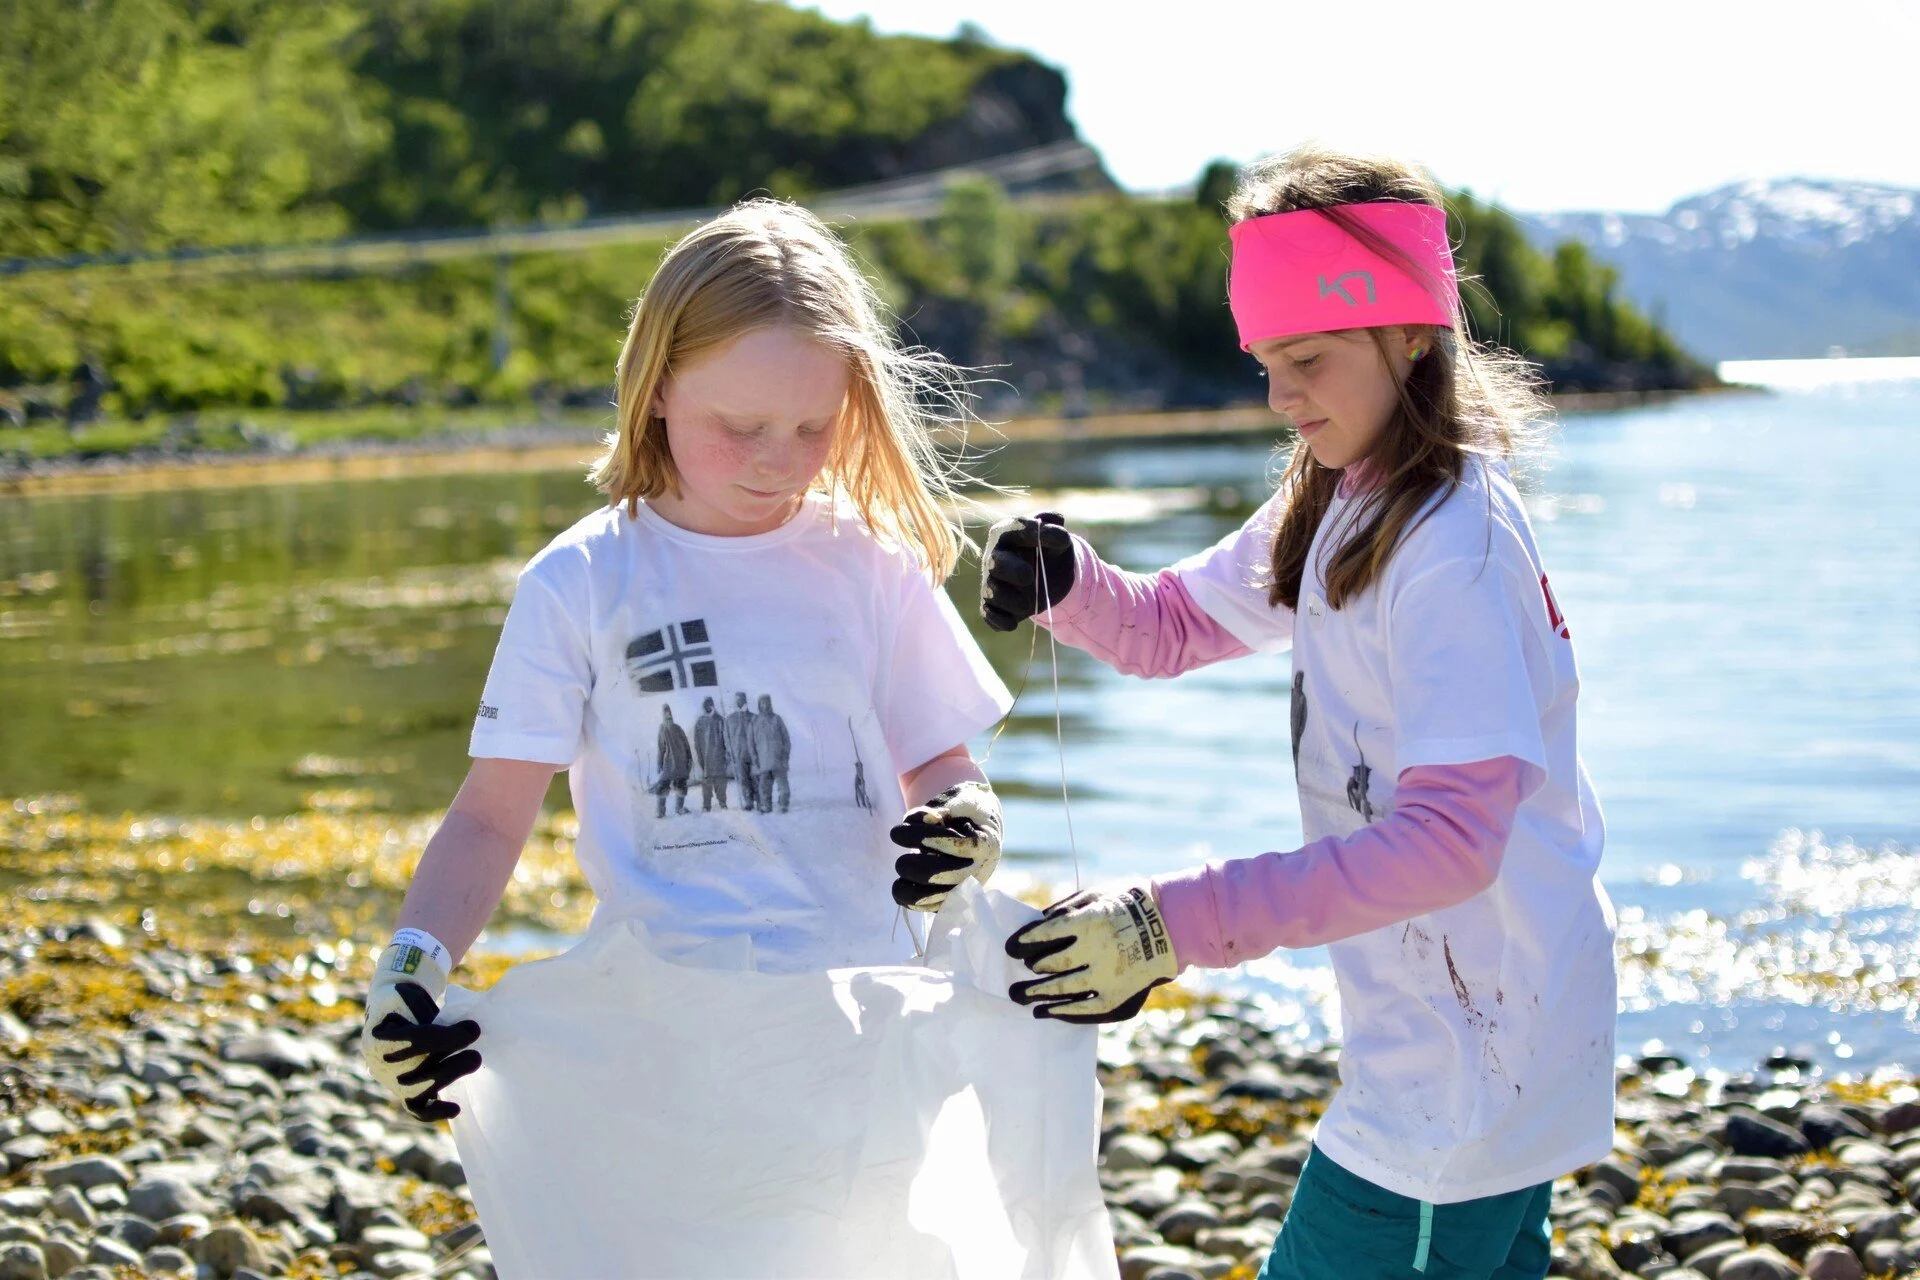 beach-cleaning-young-explorers-hgr-115999_1920-photo_anne_marte_johnsen